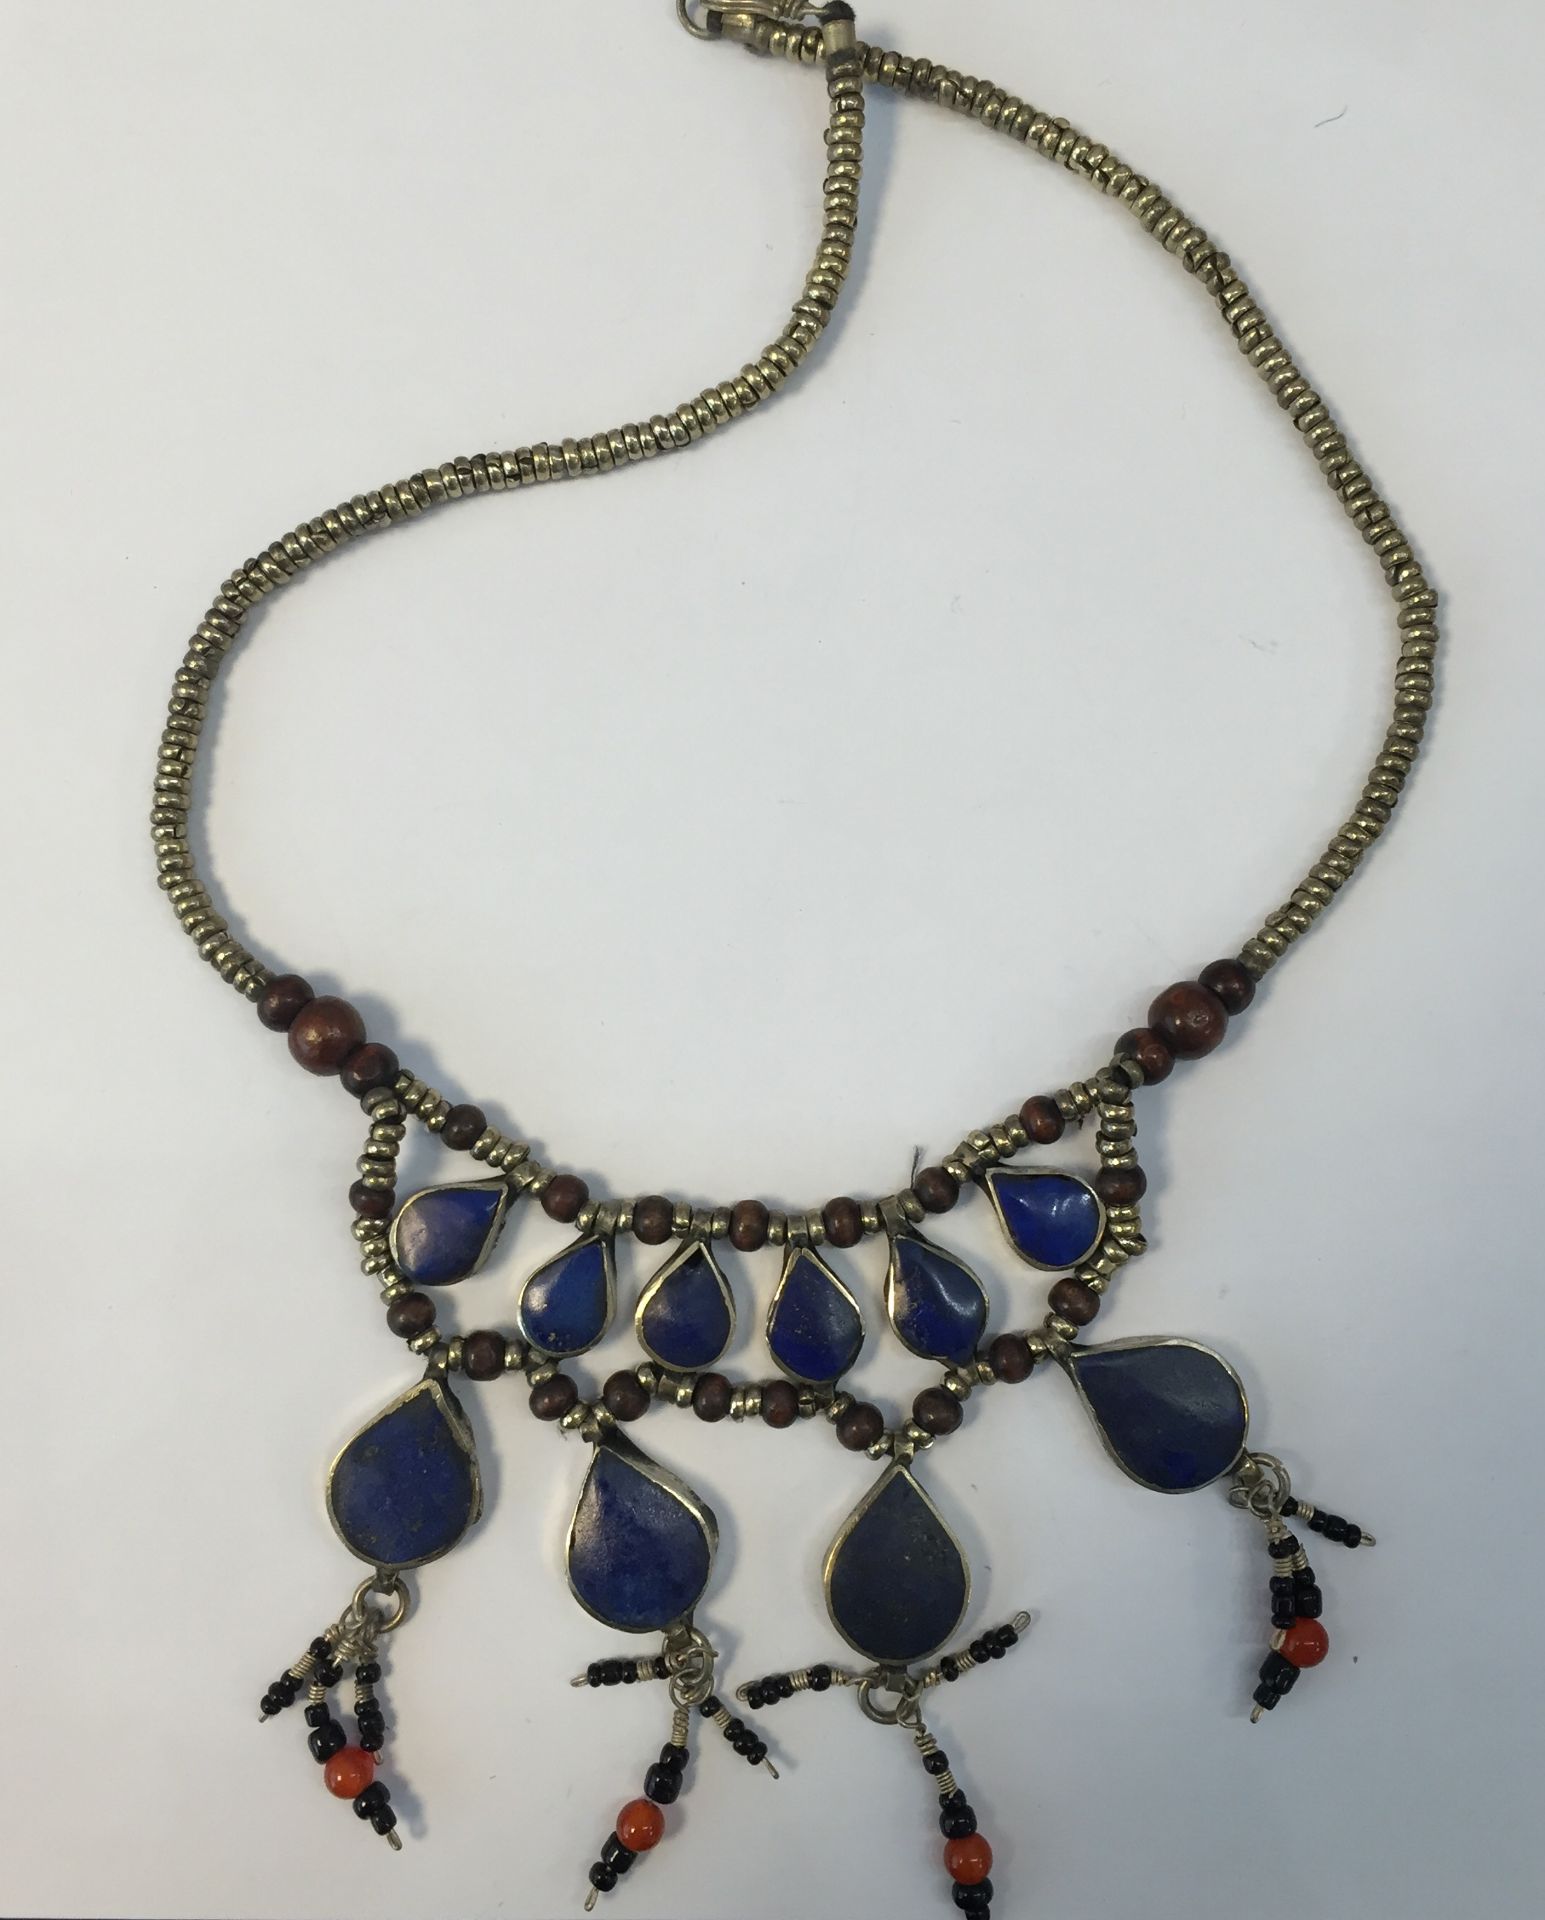 Afghan Tribal Necklace With Lapis Lazuli - Image 2 of 2